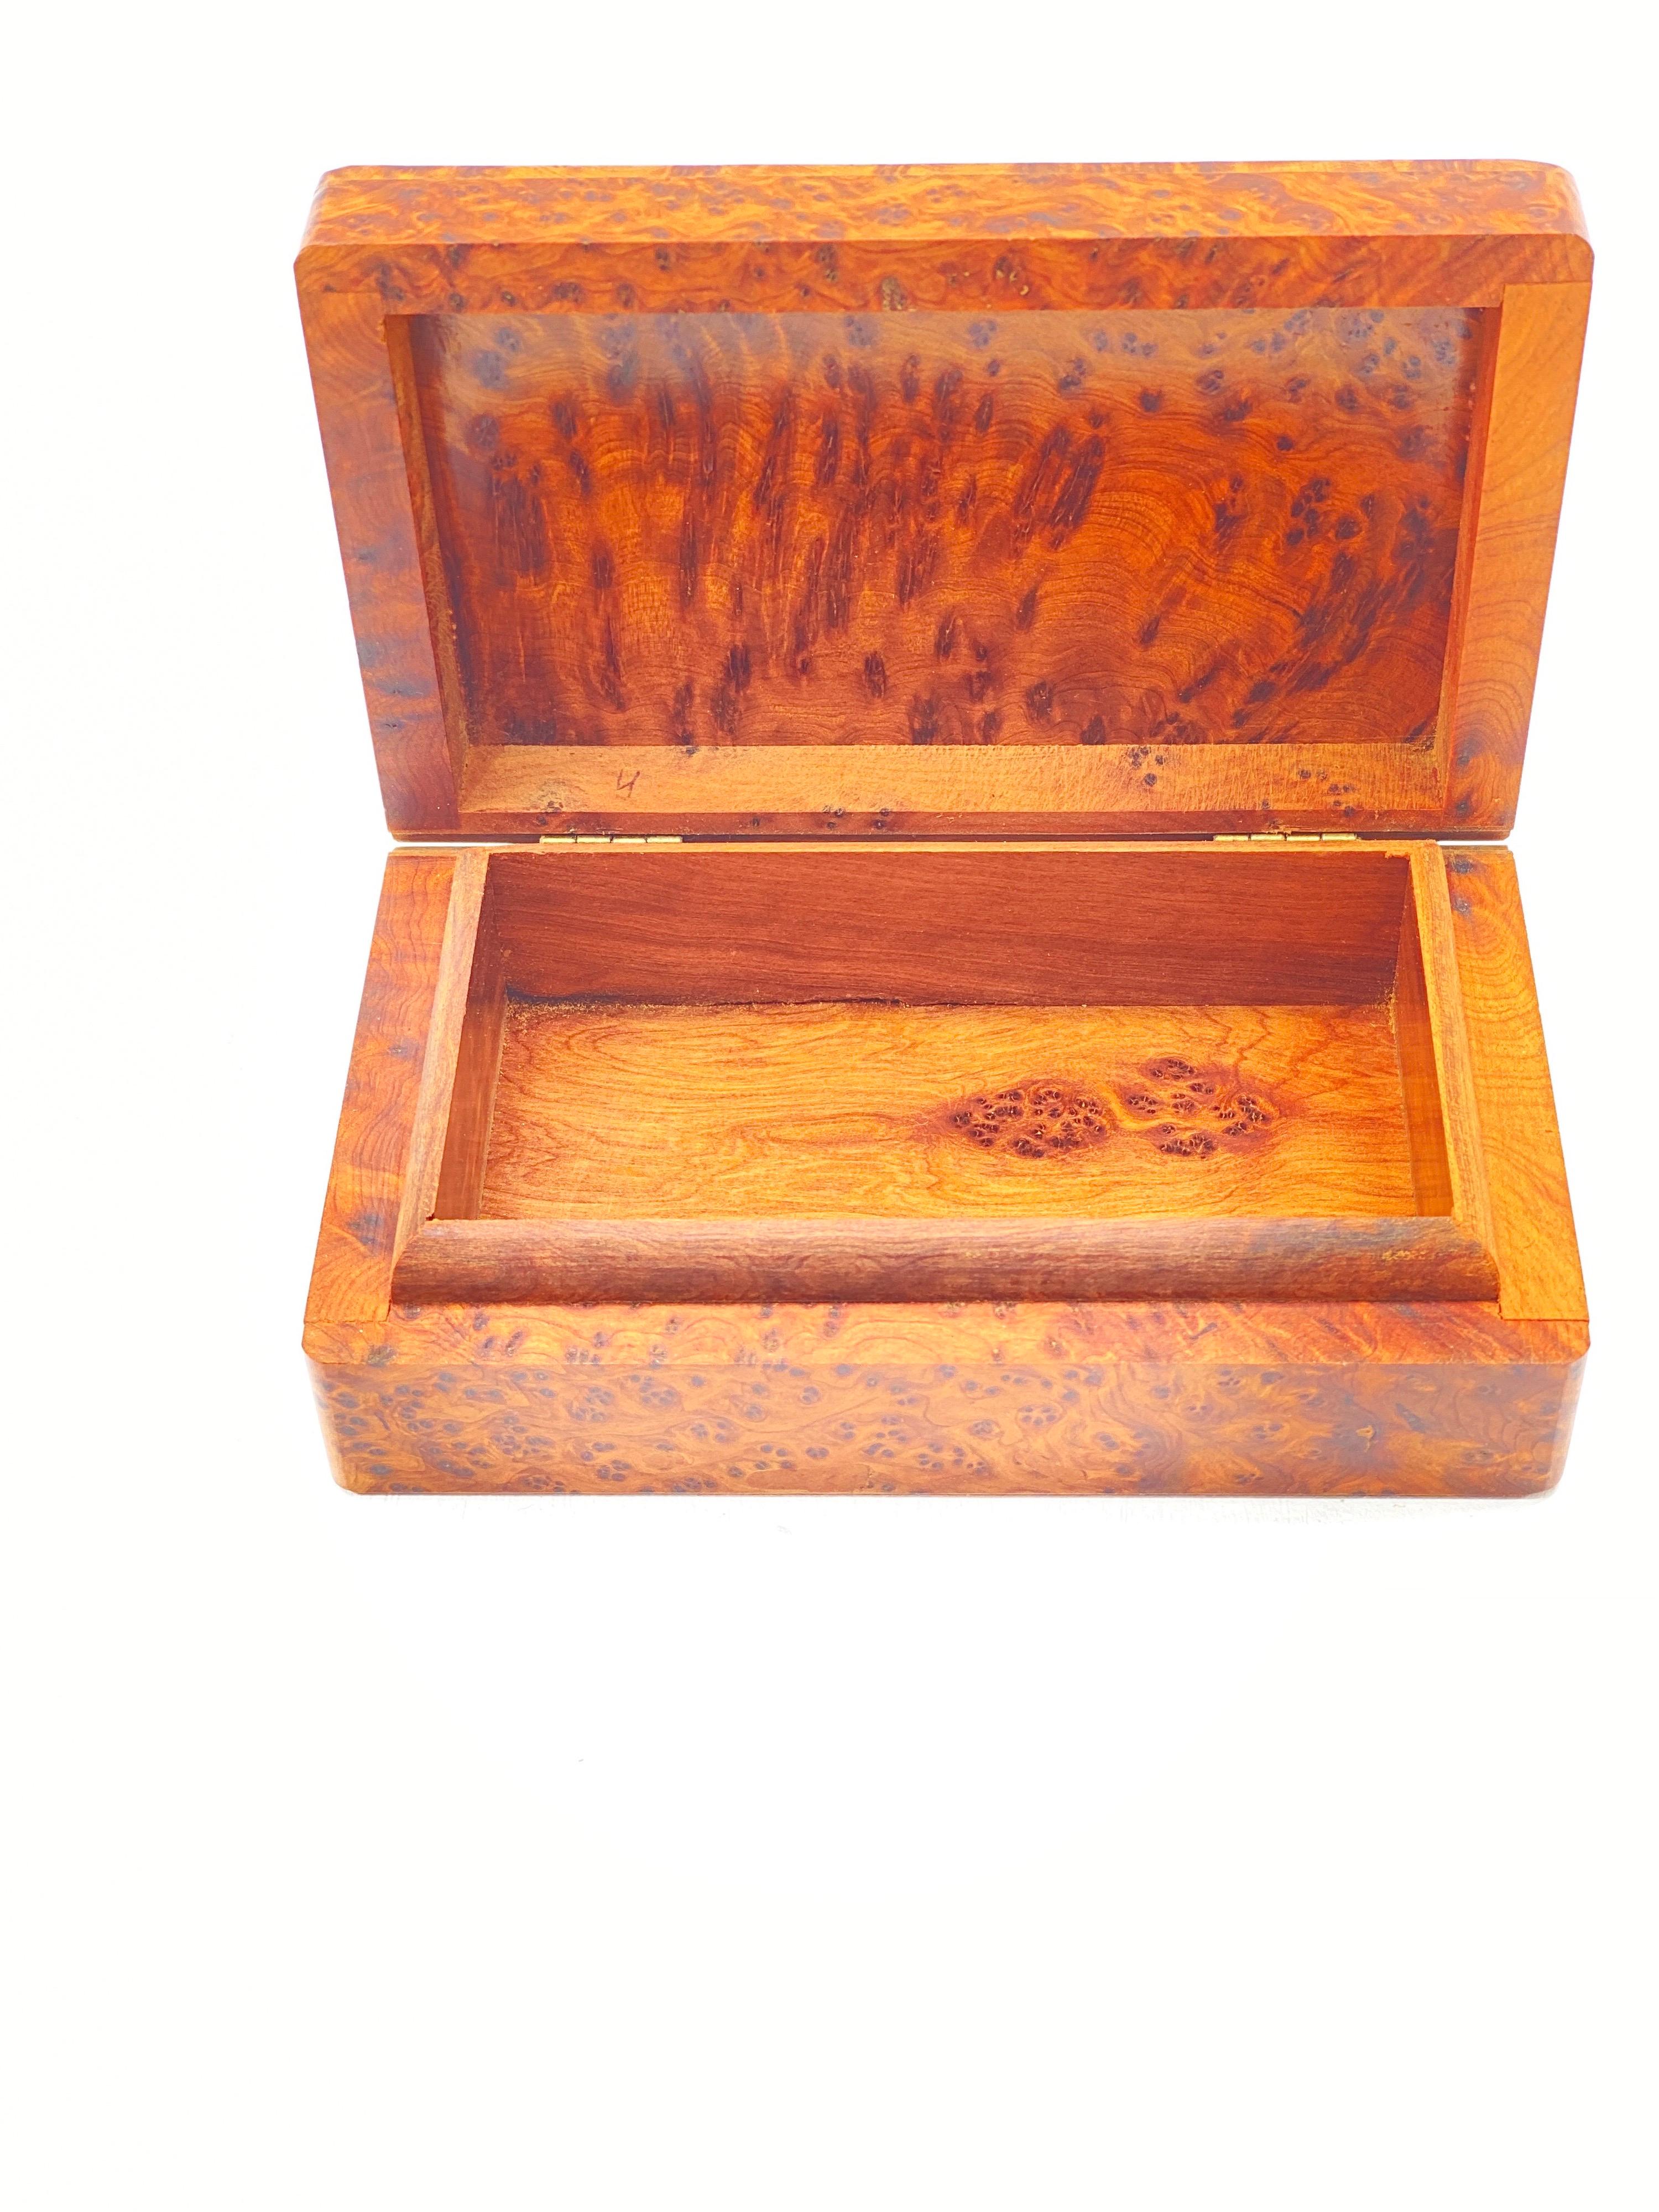 This box is in burl wood. It has been made in France in the 1970's. The color is brown, and it is in an excellent condition.